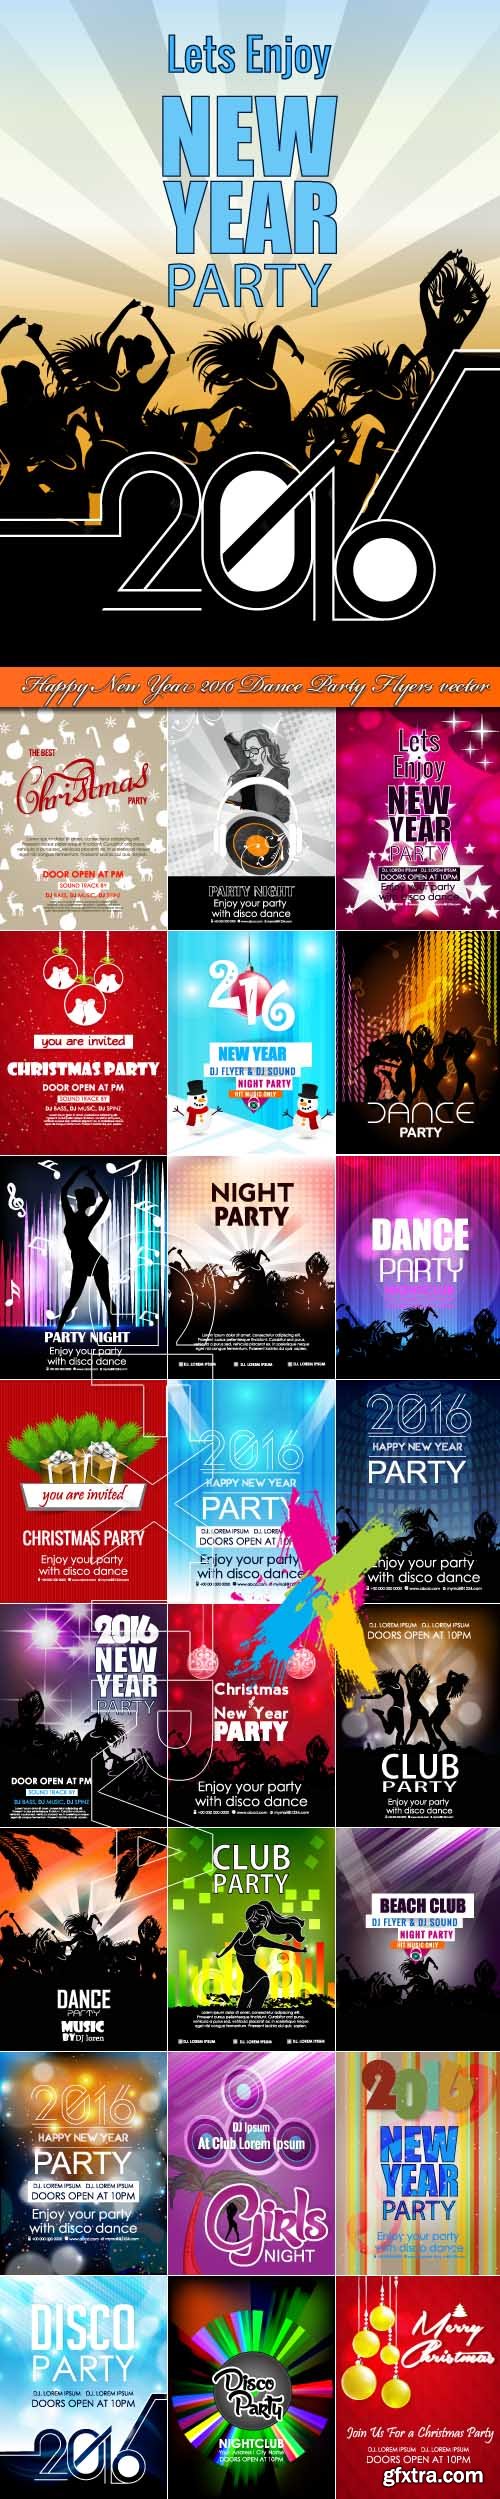 Happy New Year 2016 Dance Party Flyers vector